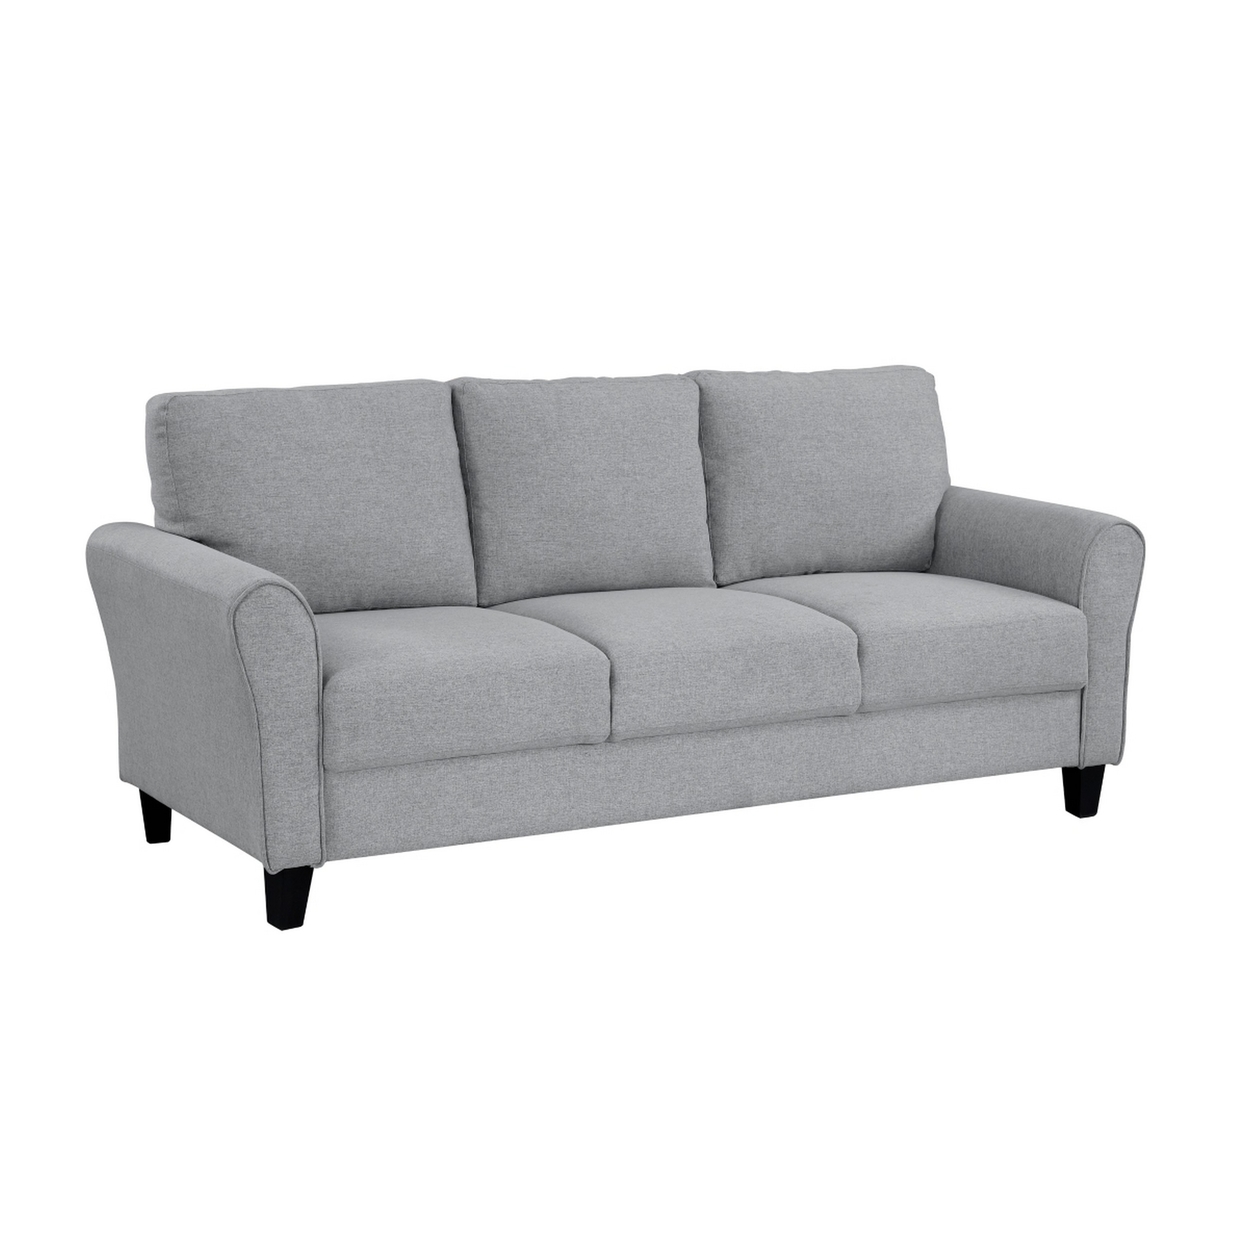 Engi 81 Inch Accent Sofa, Smooth Gray Polyester, Attached Back Cushion- Saltoro Sherpi